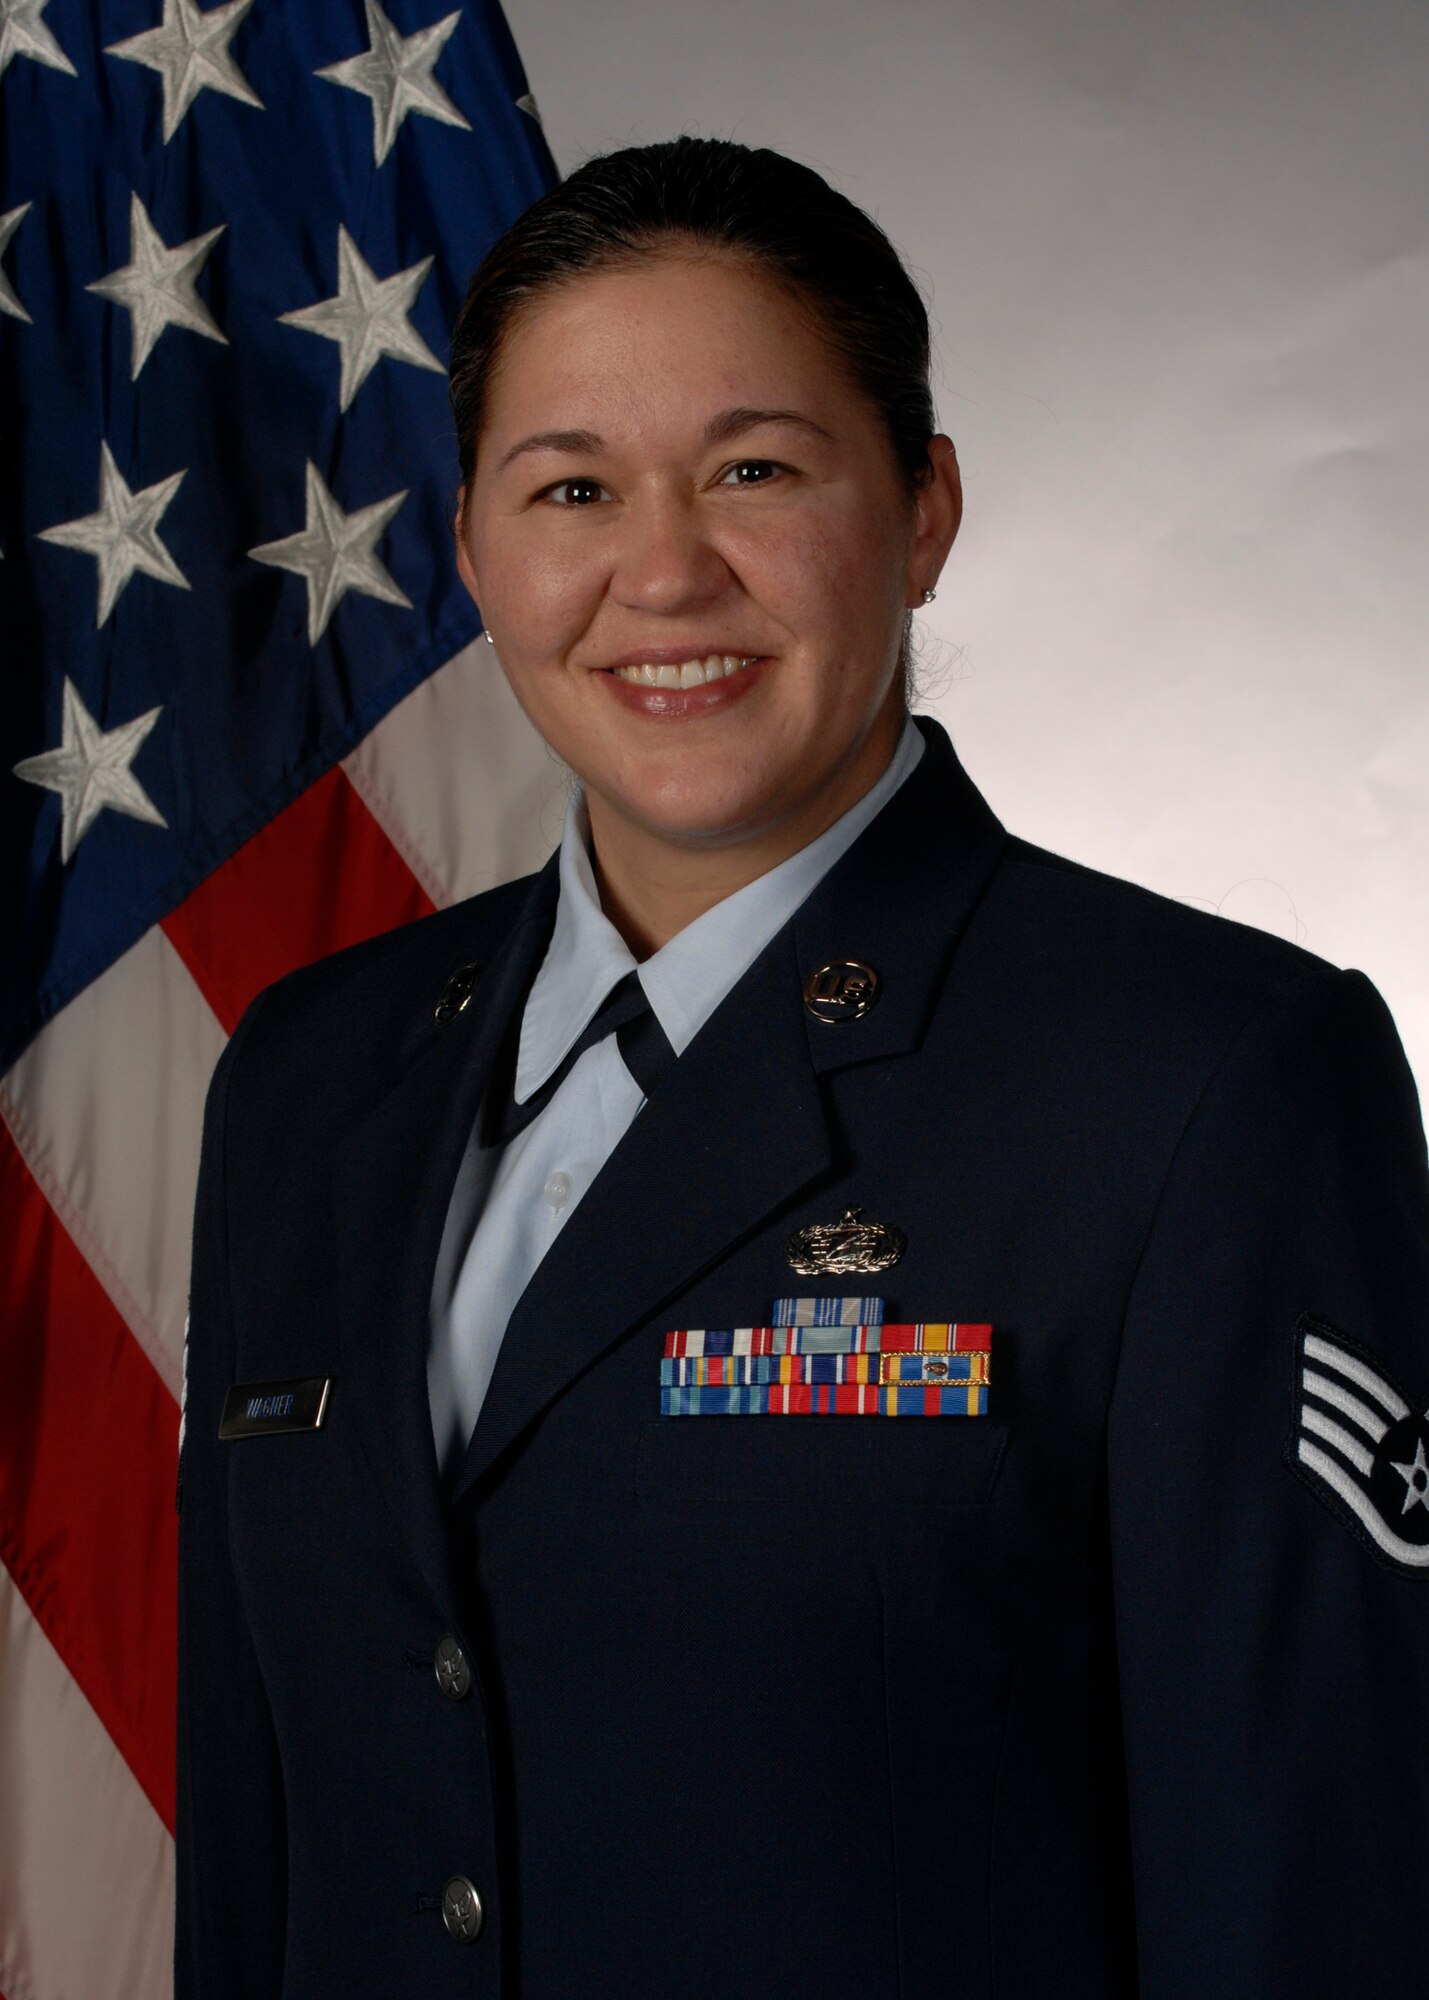 SPANGDAHLEM AIR BASE, Germany -- Staff Sgt. Amy Wagner, 372nd Training Squadron, Detachment 17, is the 52nd Fighter Wing's Top Saber Performer for the week of Jan. 15-21. (Courtesy photo)